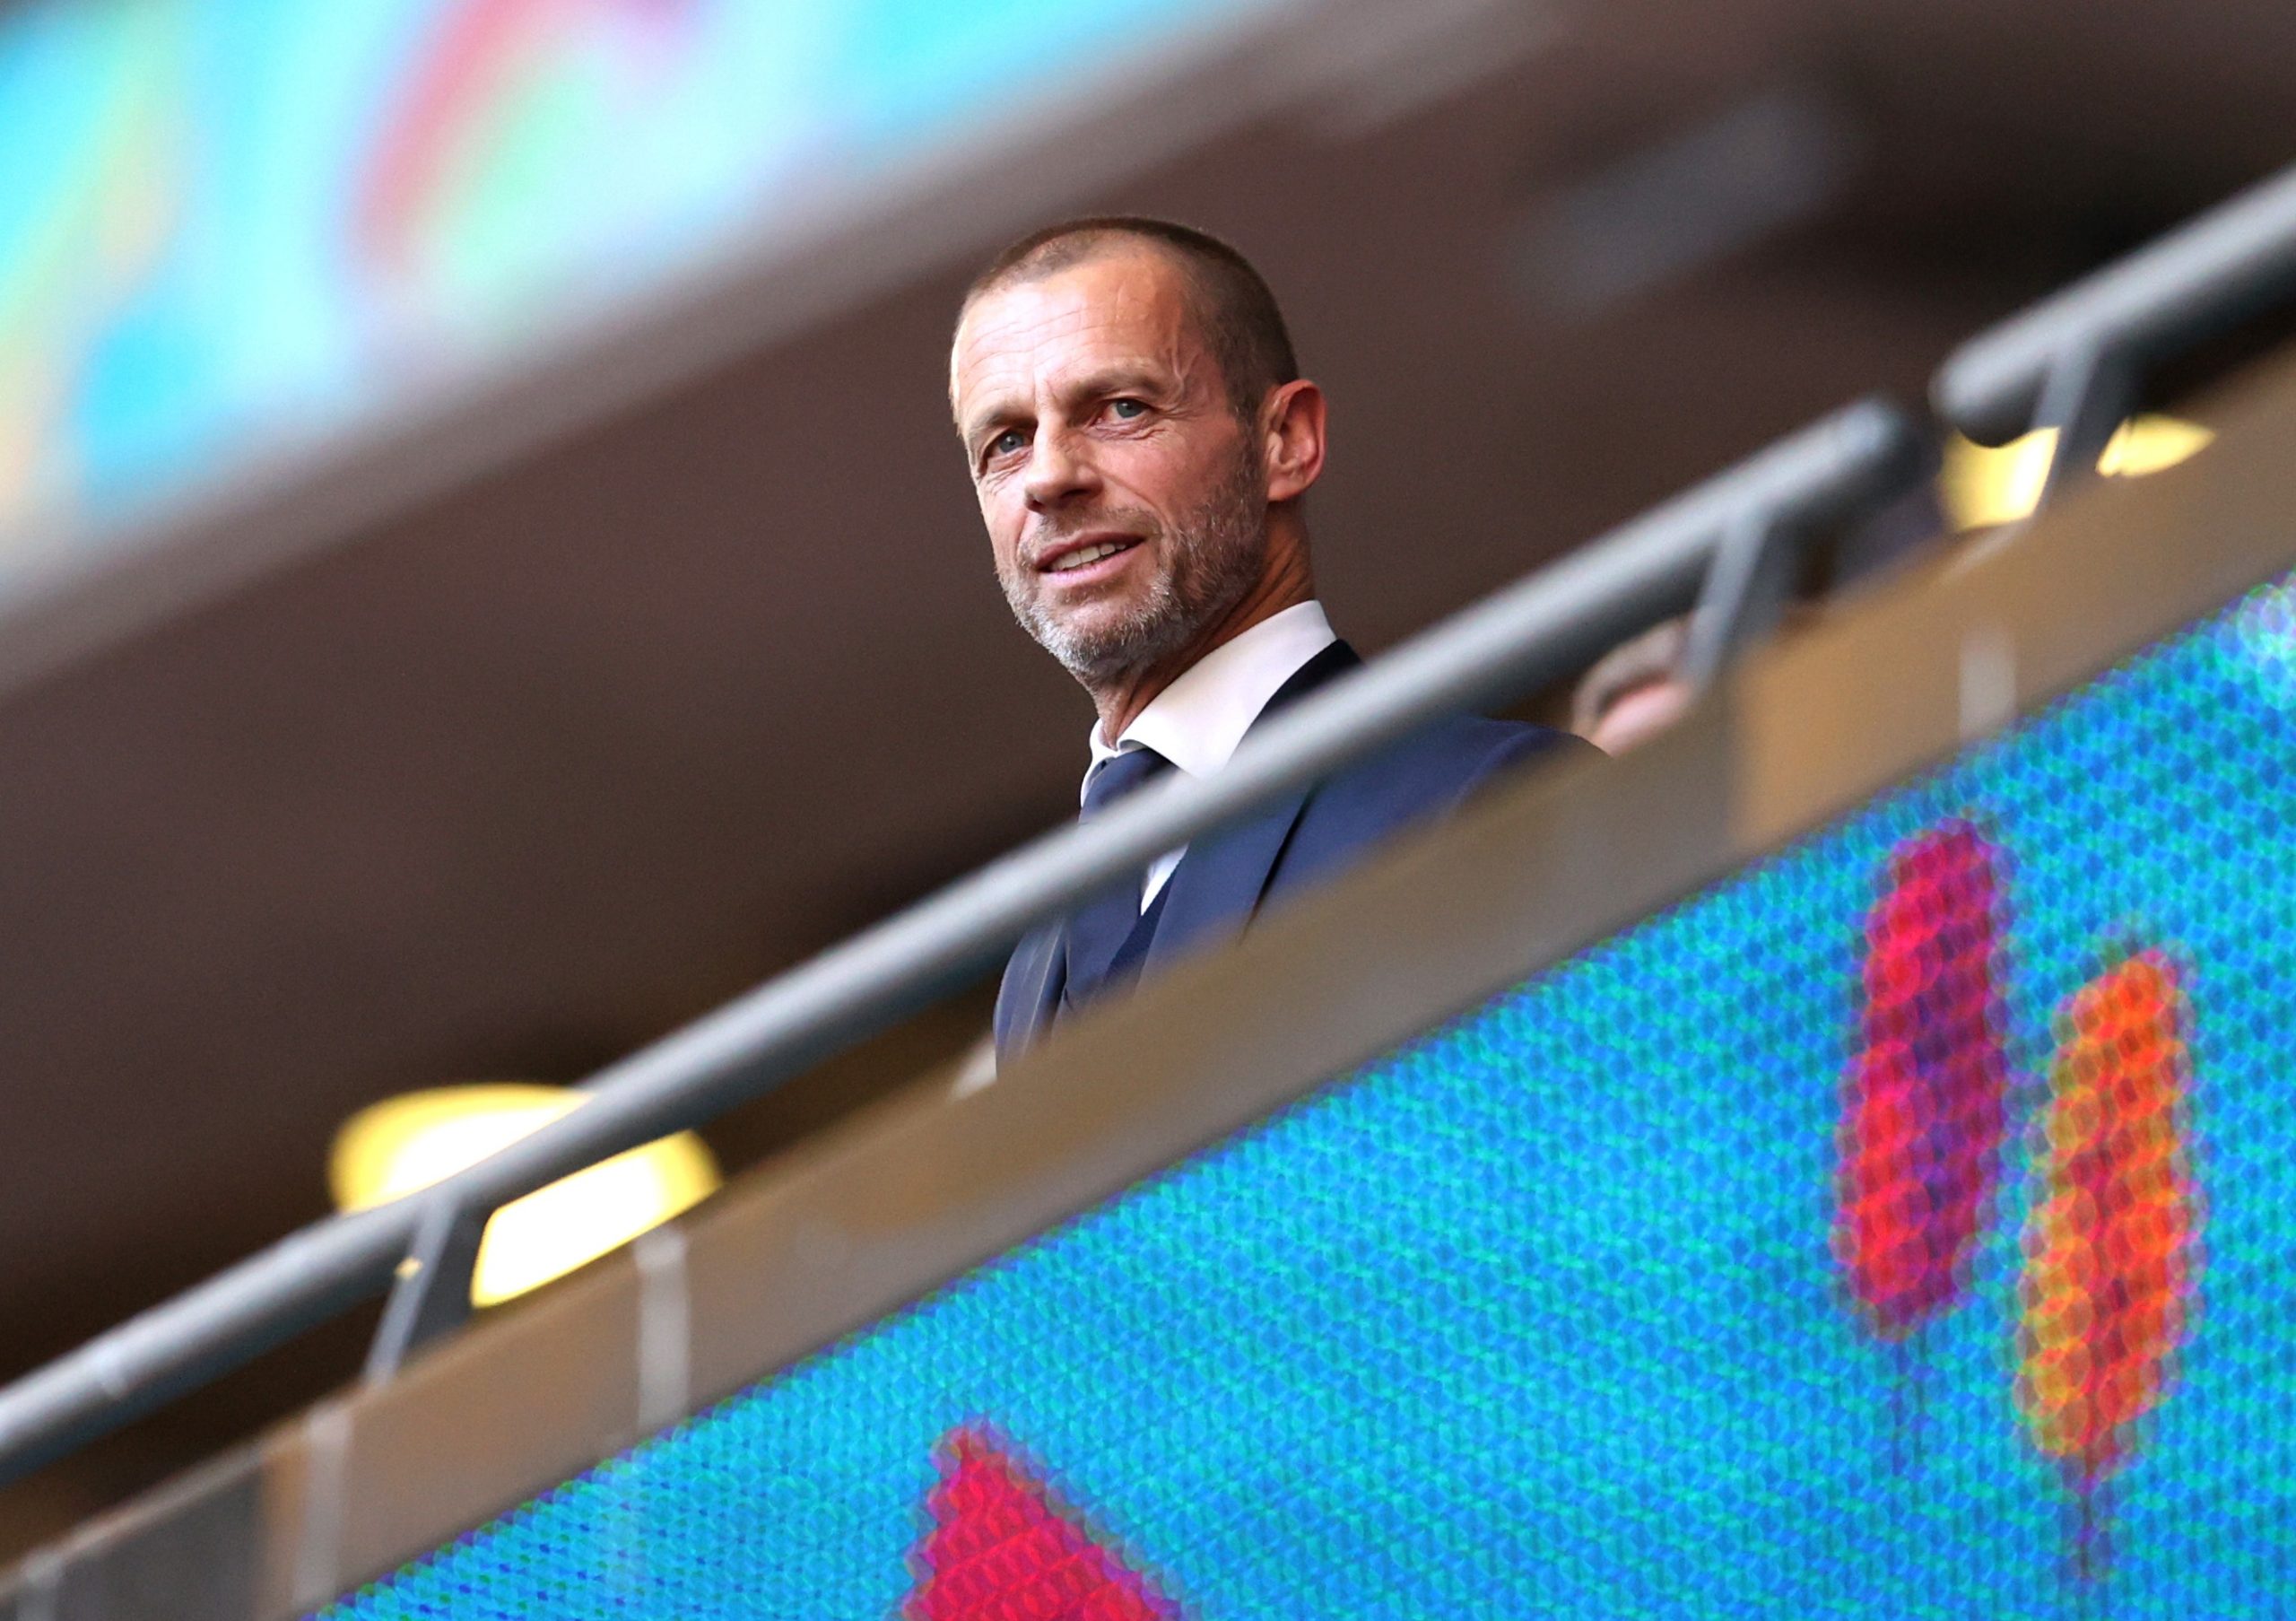 Euro 2020 - Semi Final - England v Denmark Soccer Football - Euro 2020 - Semi Final - England v Denmark - Wembley Stadium, London, Britain - July 7, 2021 UEFA President Aleksander Ceferin in the stands before the match Pool via REUTERS/Catherine Ivill CATHERINE IVILL